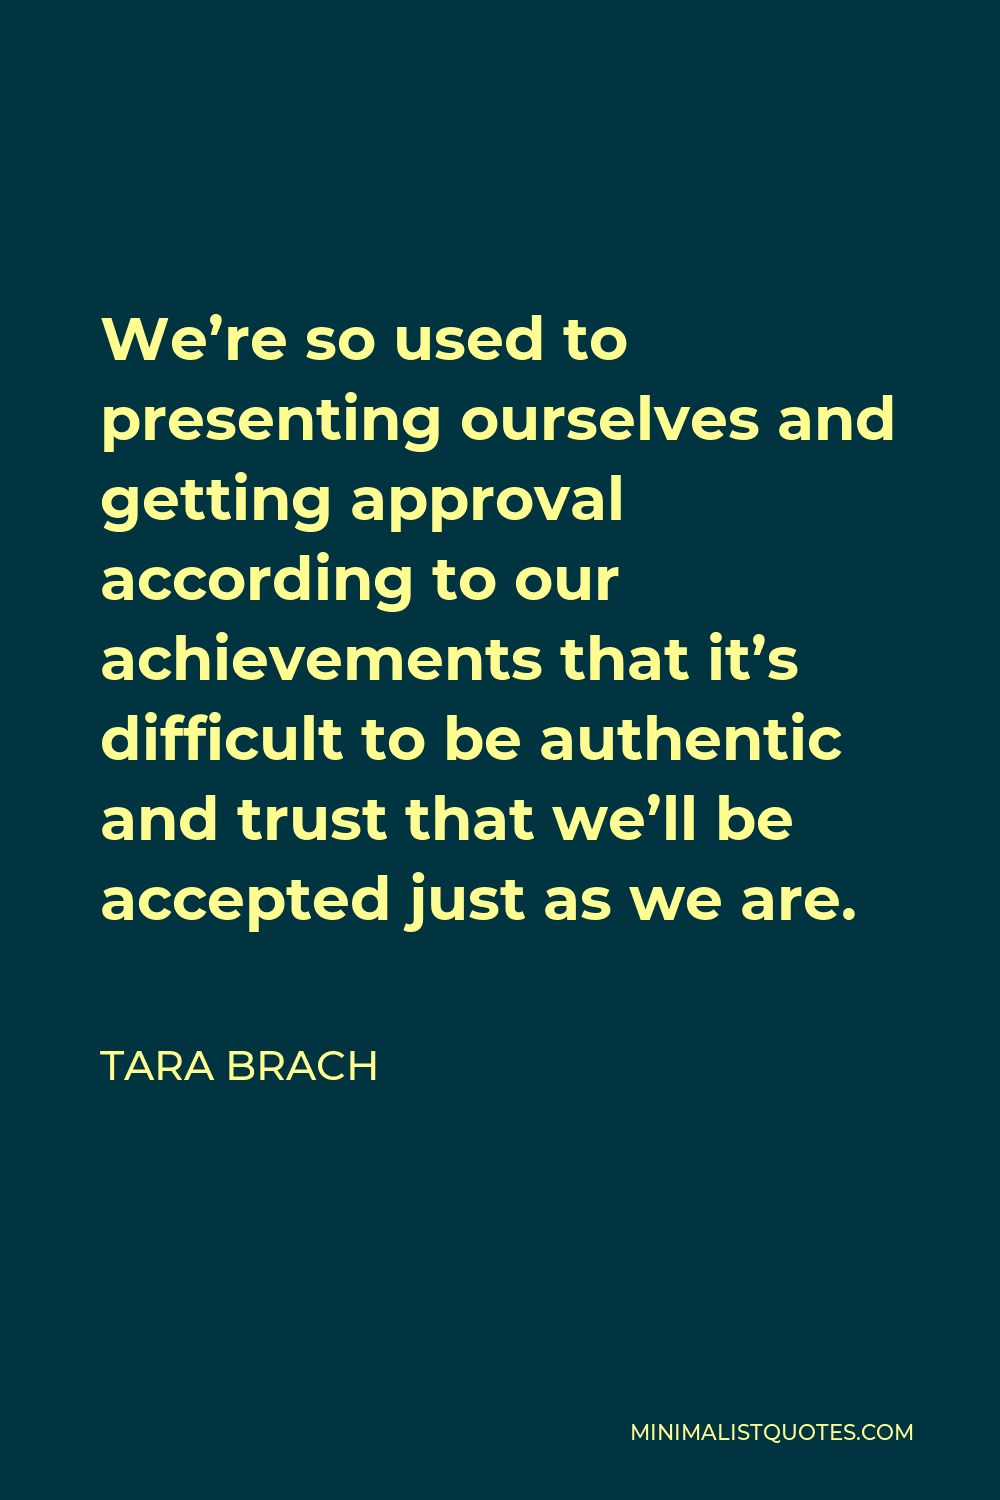 Tara Brach Quote - We’re so used to presenting ourselves and getting approval according to our achievements that it’s difficult to be authentic and trust that we’ll be accepted just as we are.